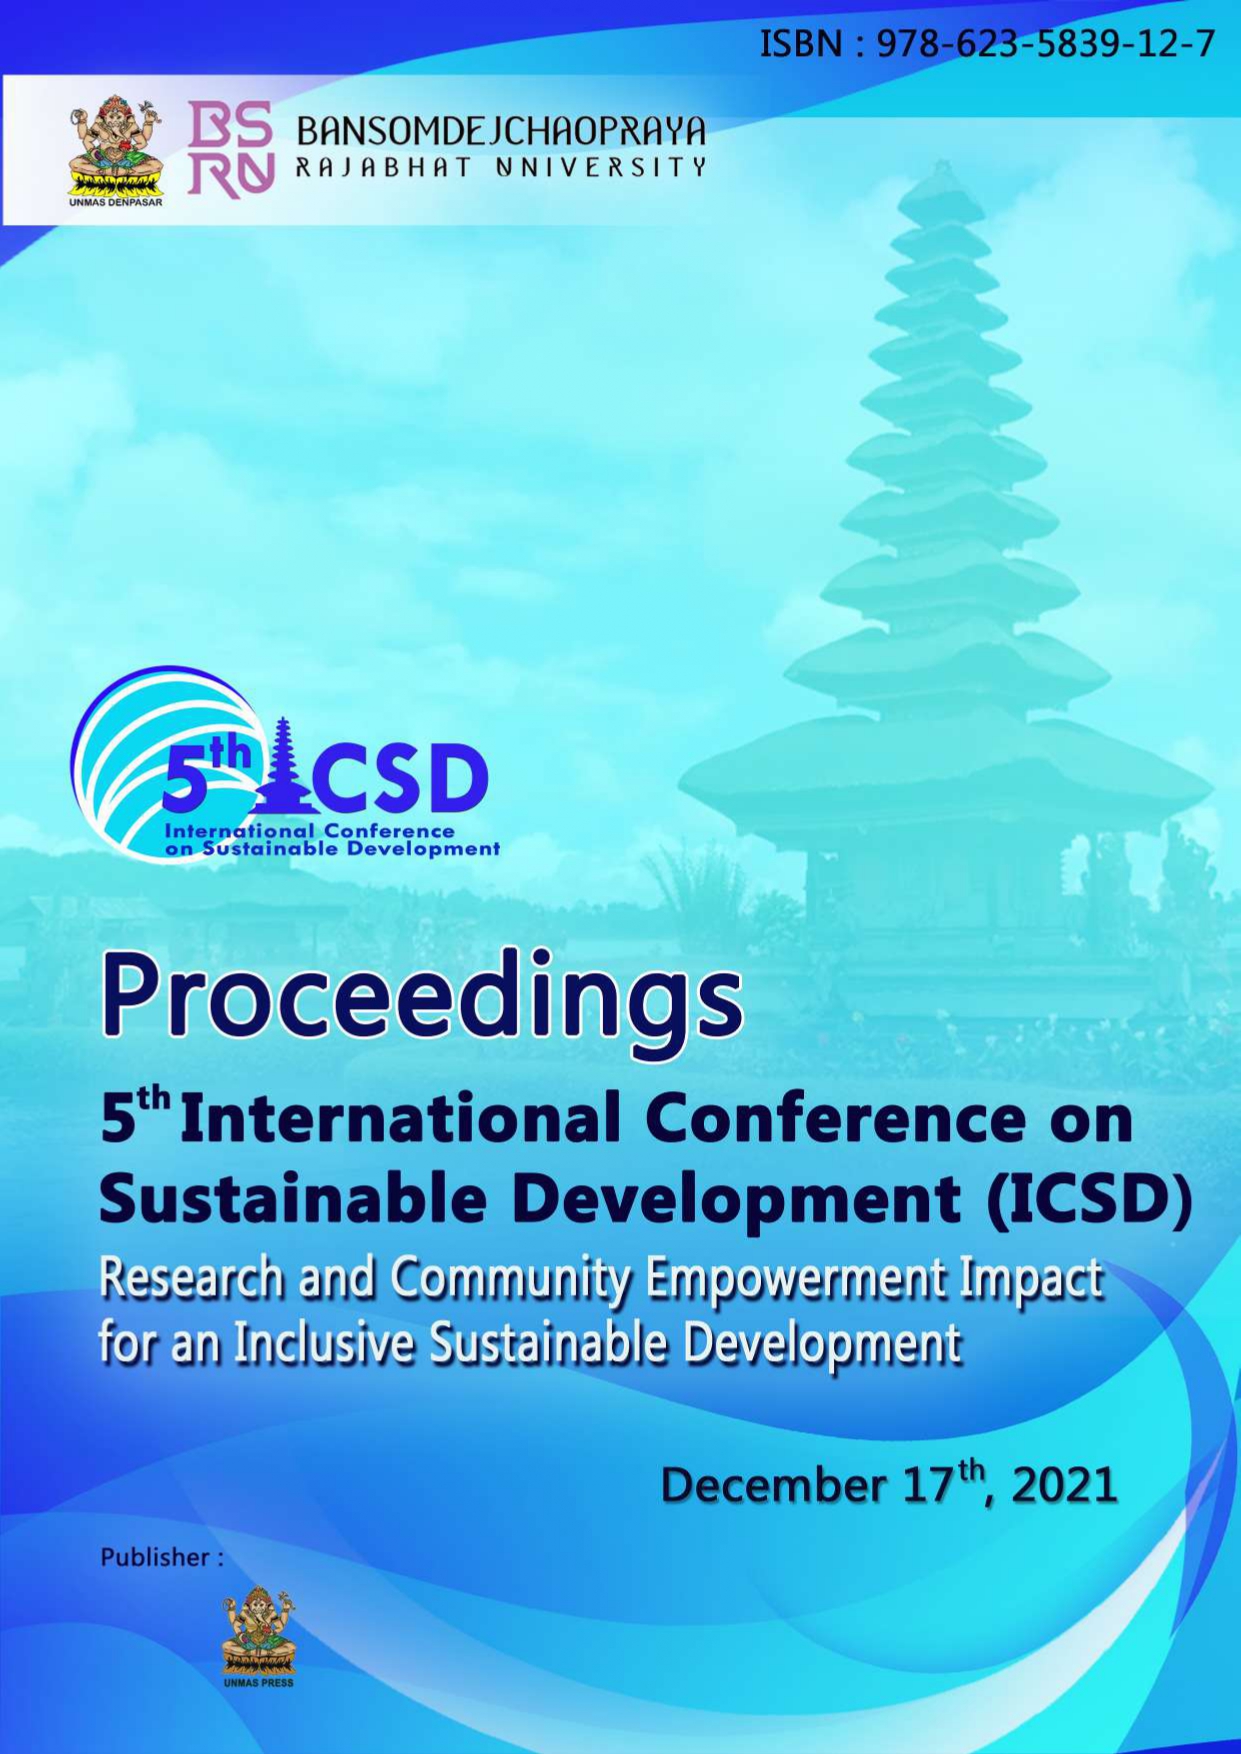 					View 2022: Proceeding The 5th International Conference on Sustainable Development (ICSD)
				